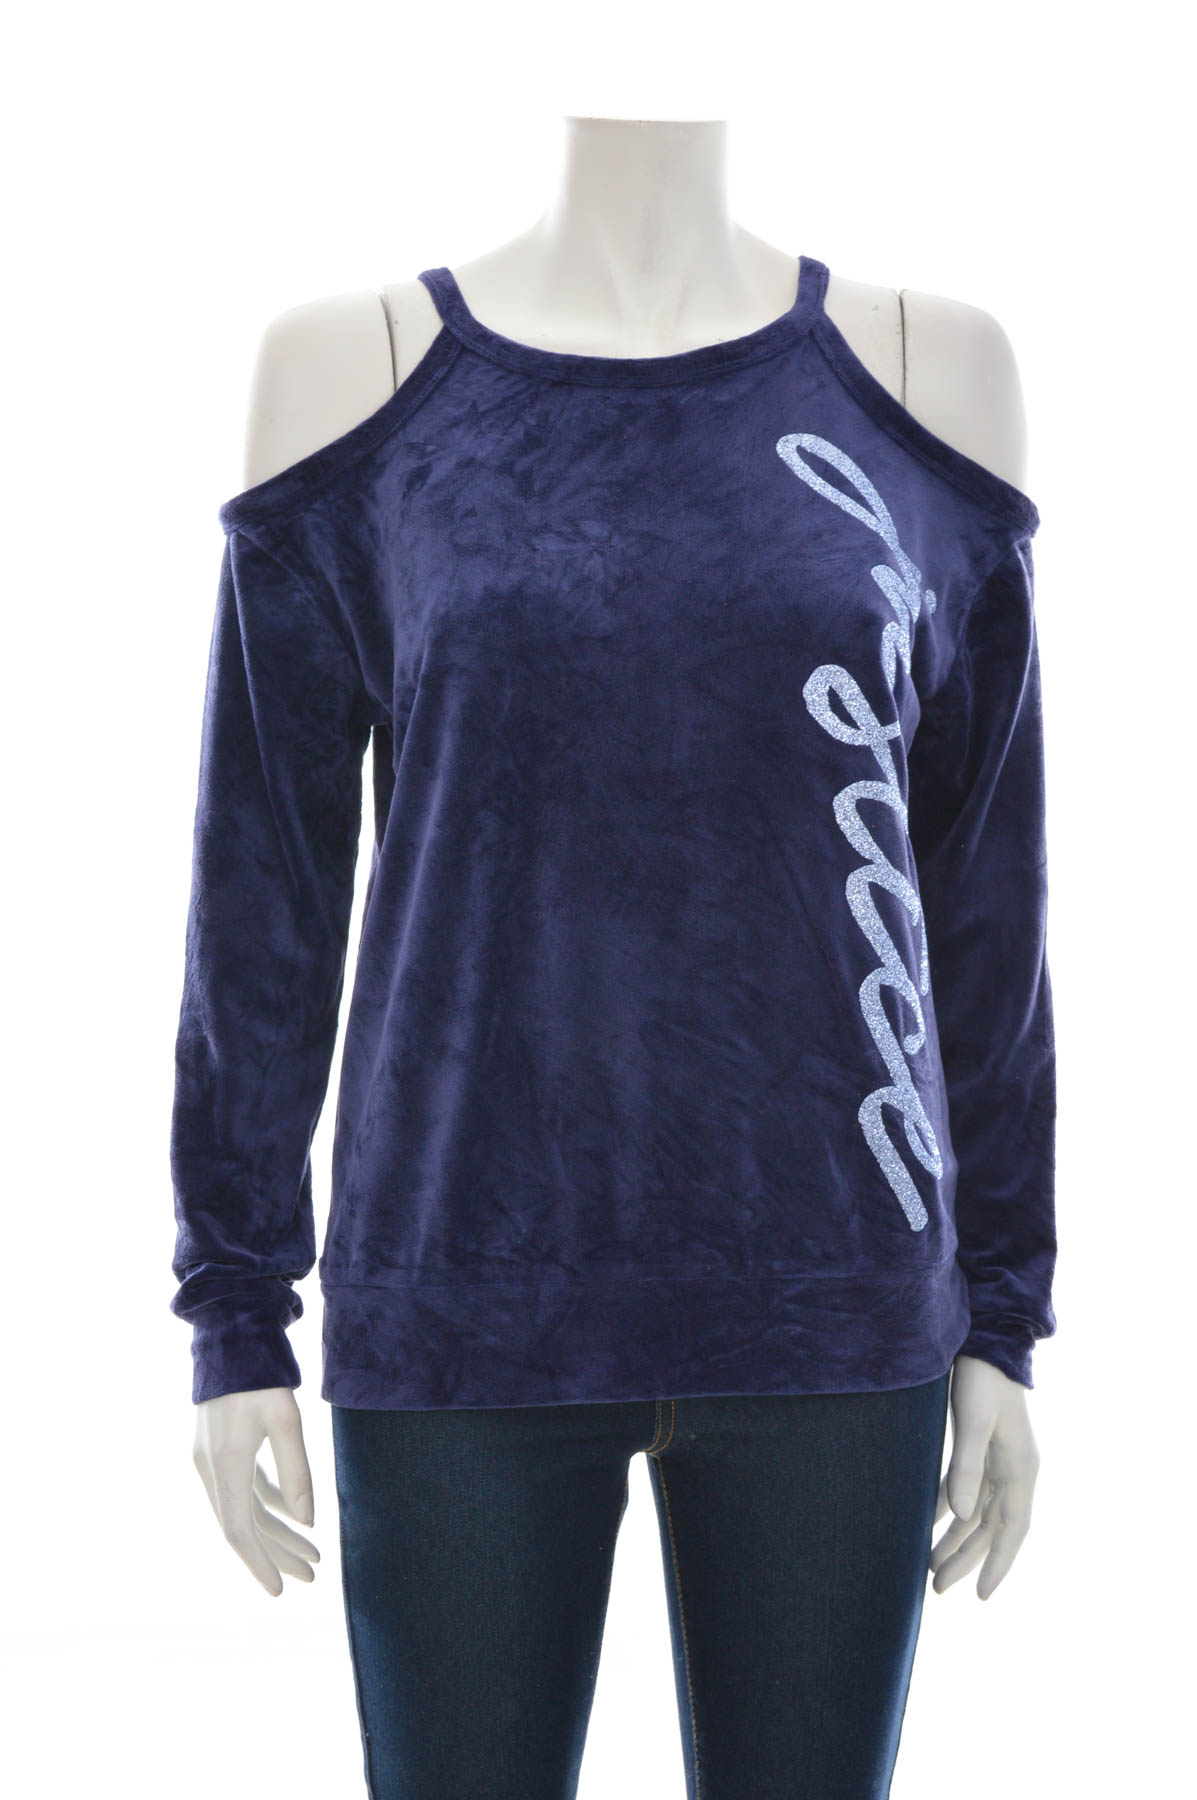 Girls' blouse - JUSTICE ACTIVE - 0